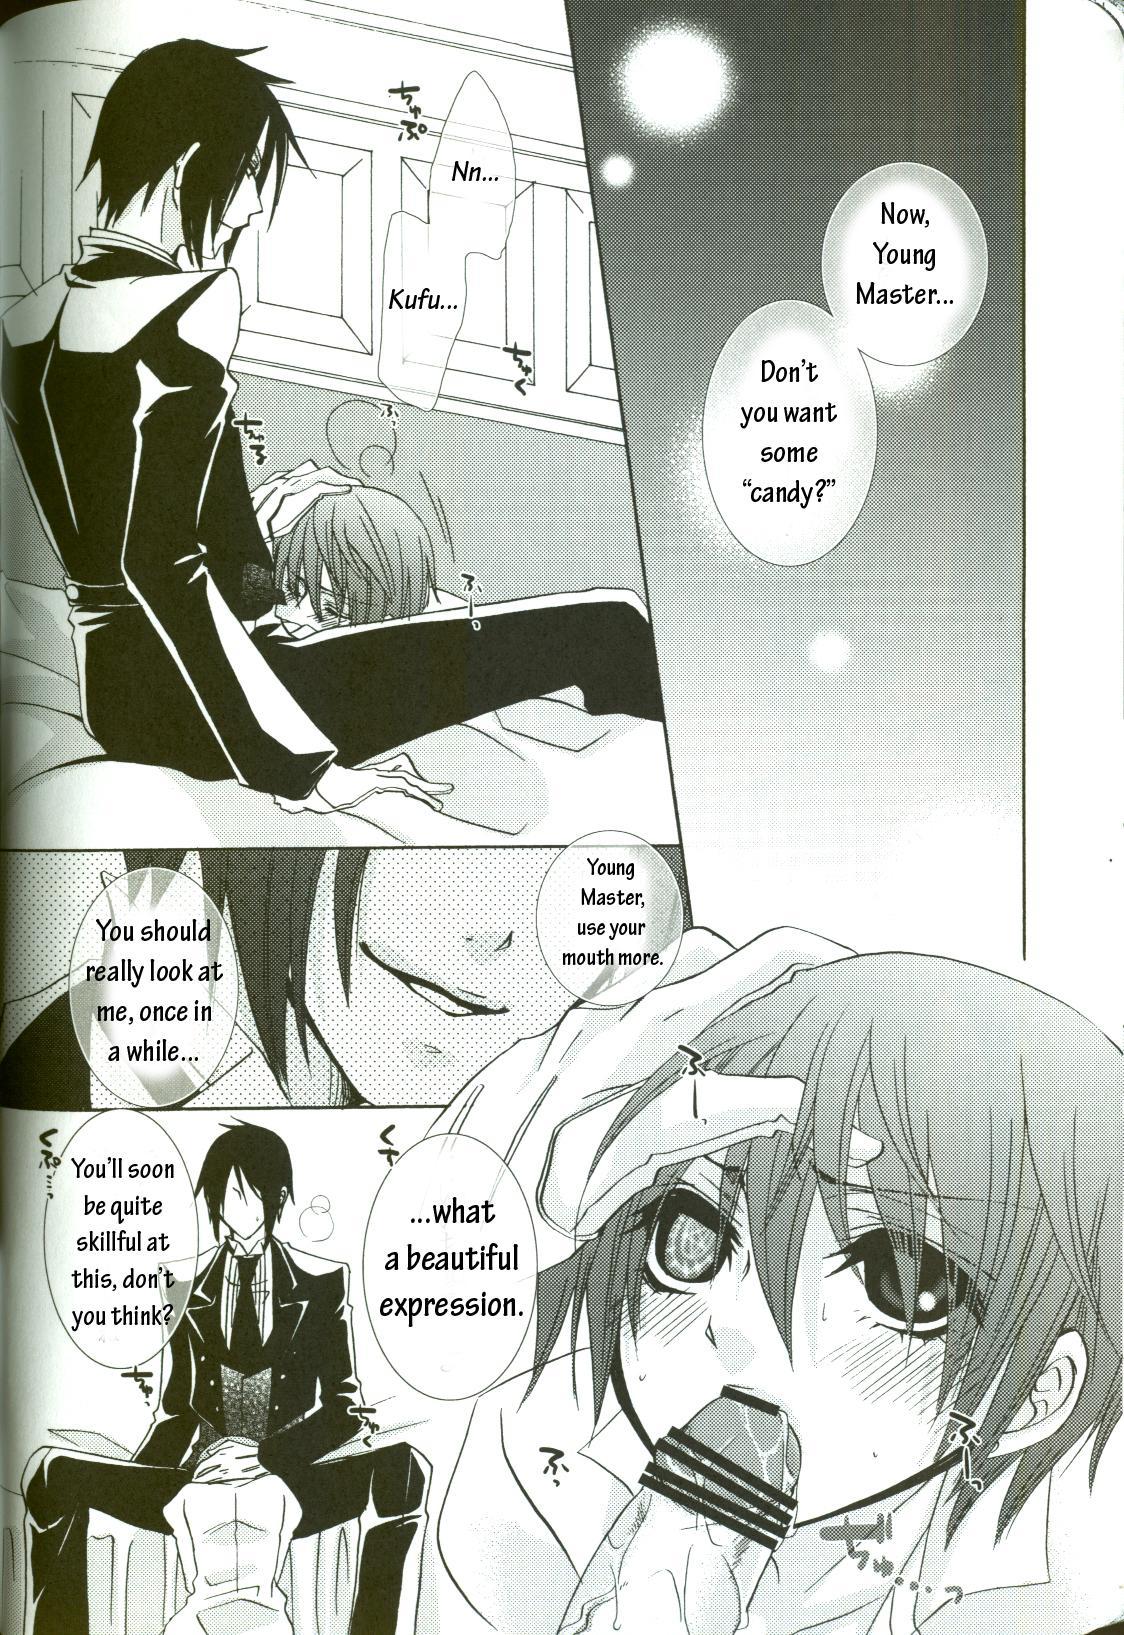 Hot Mom Trick or Treat? - Black butler Fitness - Page 7